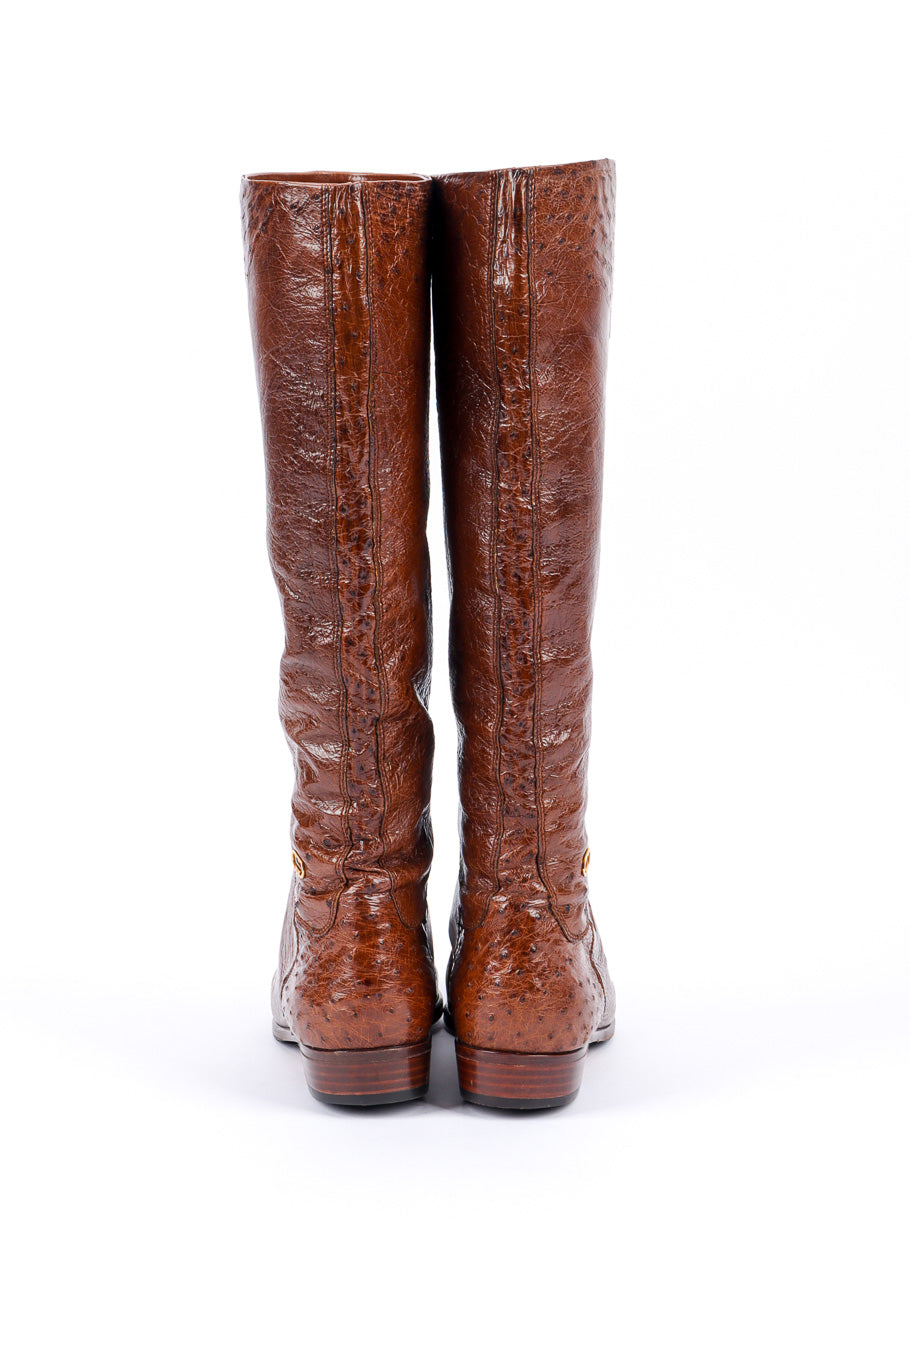 Vintage Gucci Brown Ostrich Leather Riding Boot back view @recessla